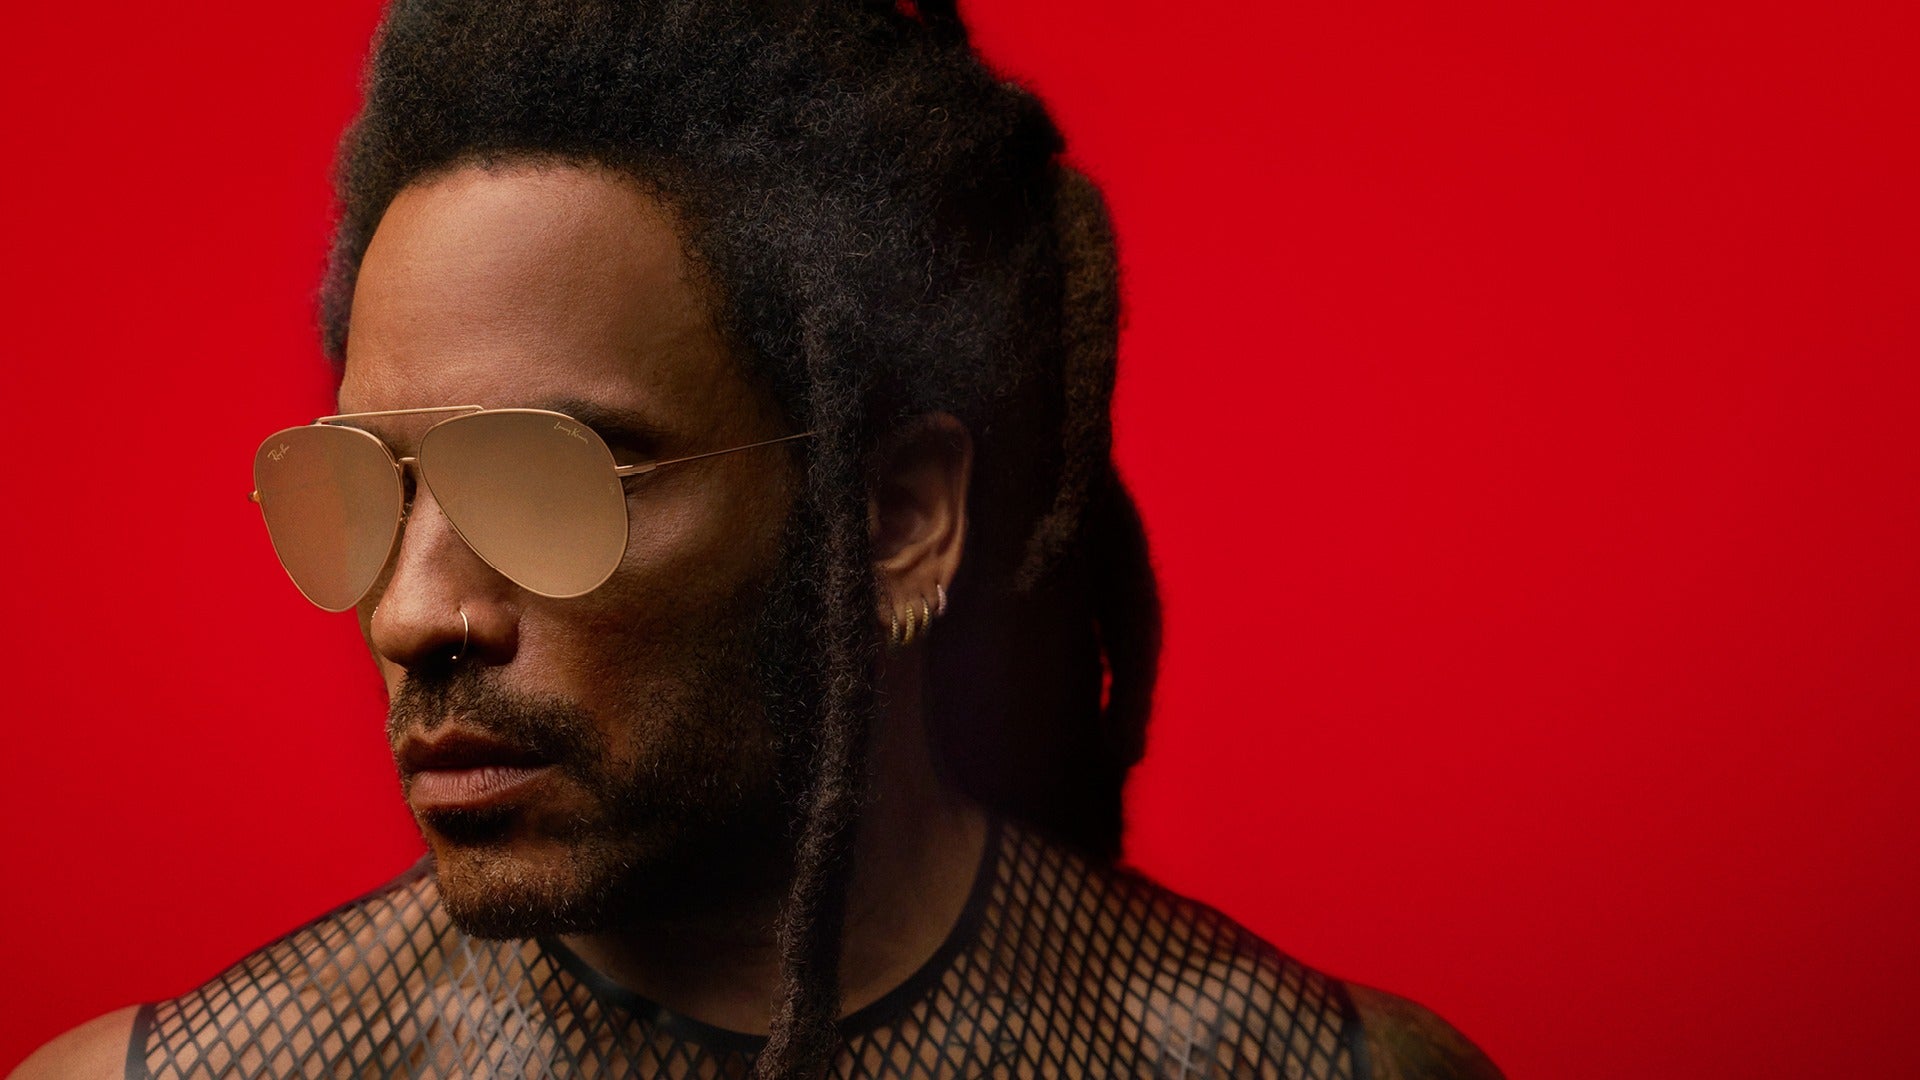 Ray-Ban Taps Lenny Kravitz For An Exclusive Capsule Collection